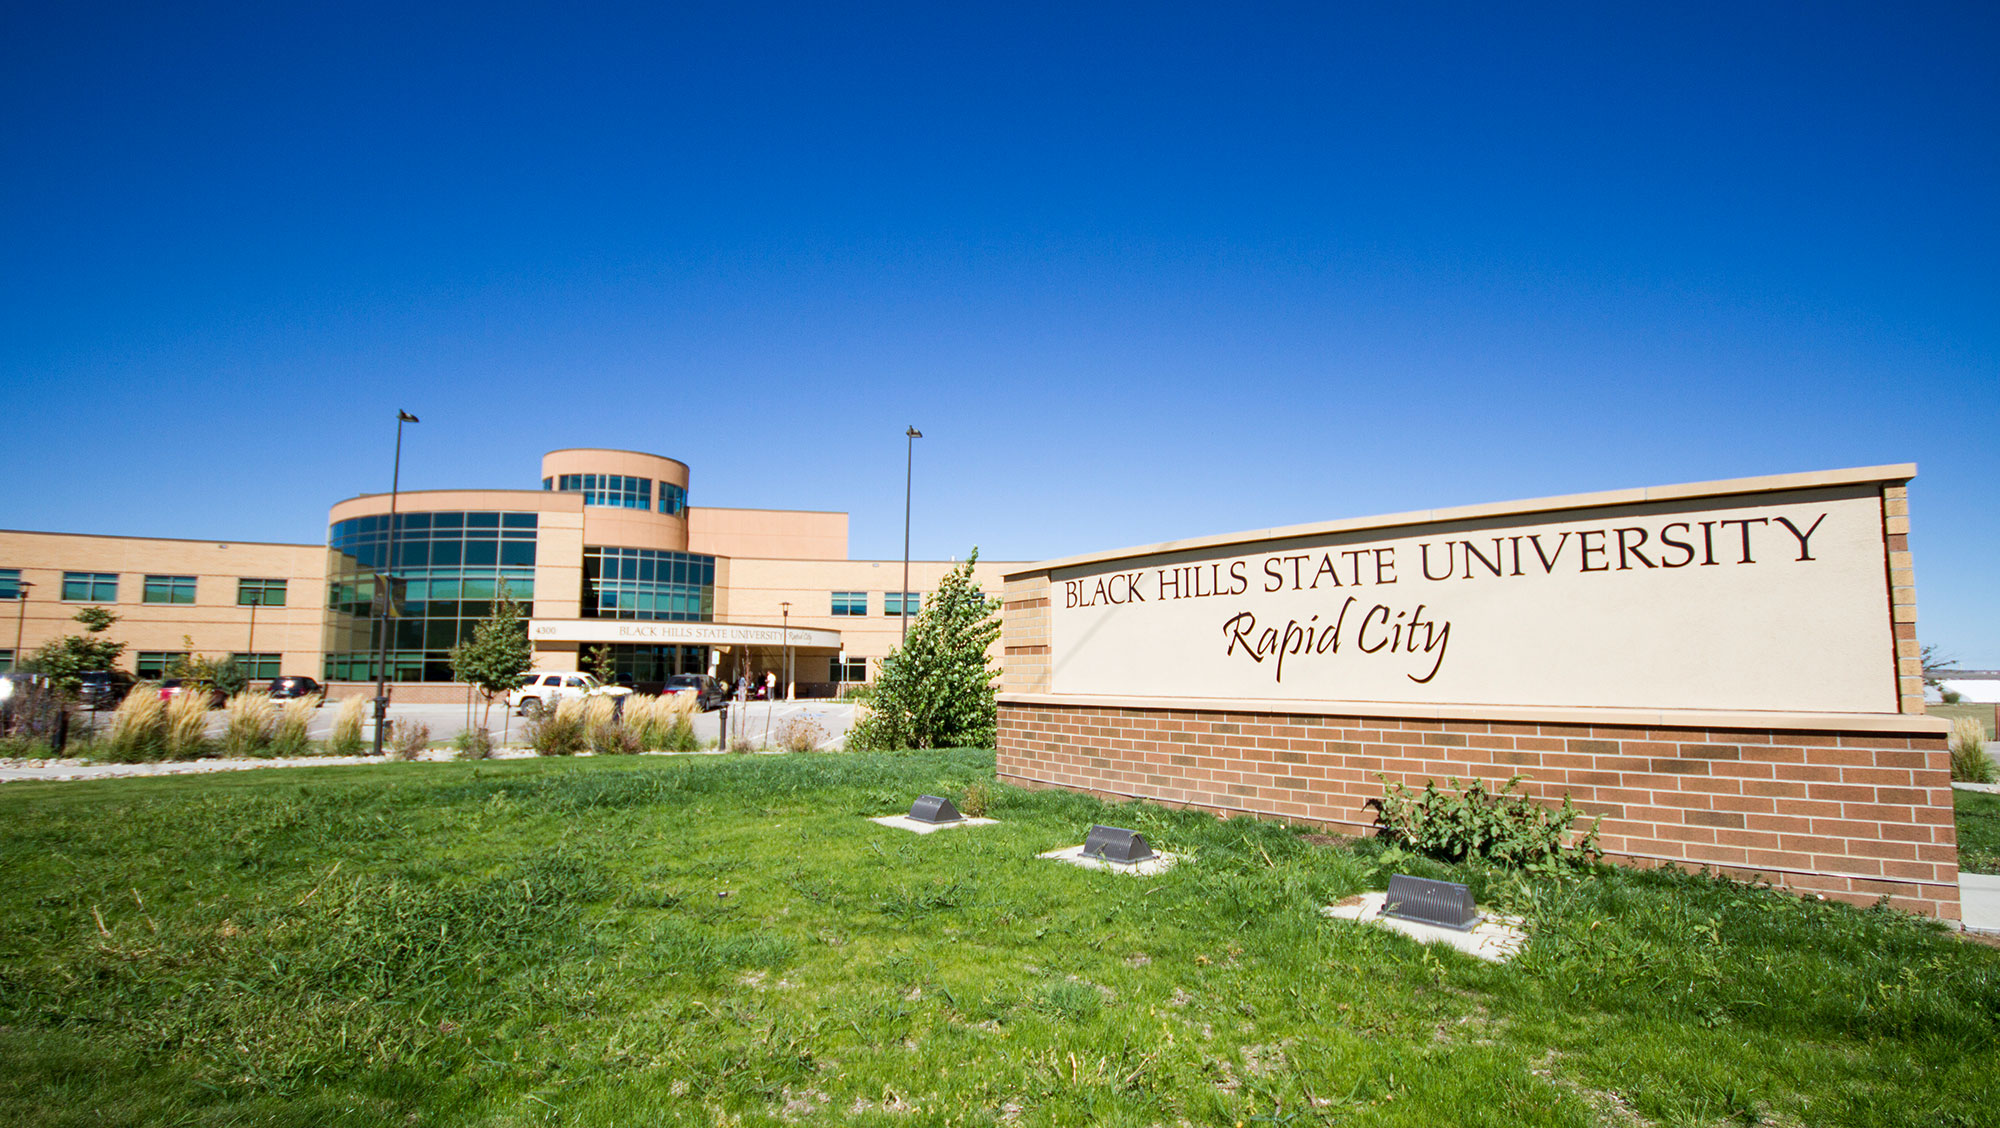 Image of BHSU-RC campus with green grass and sign.